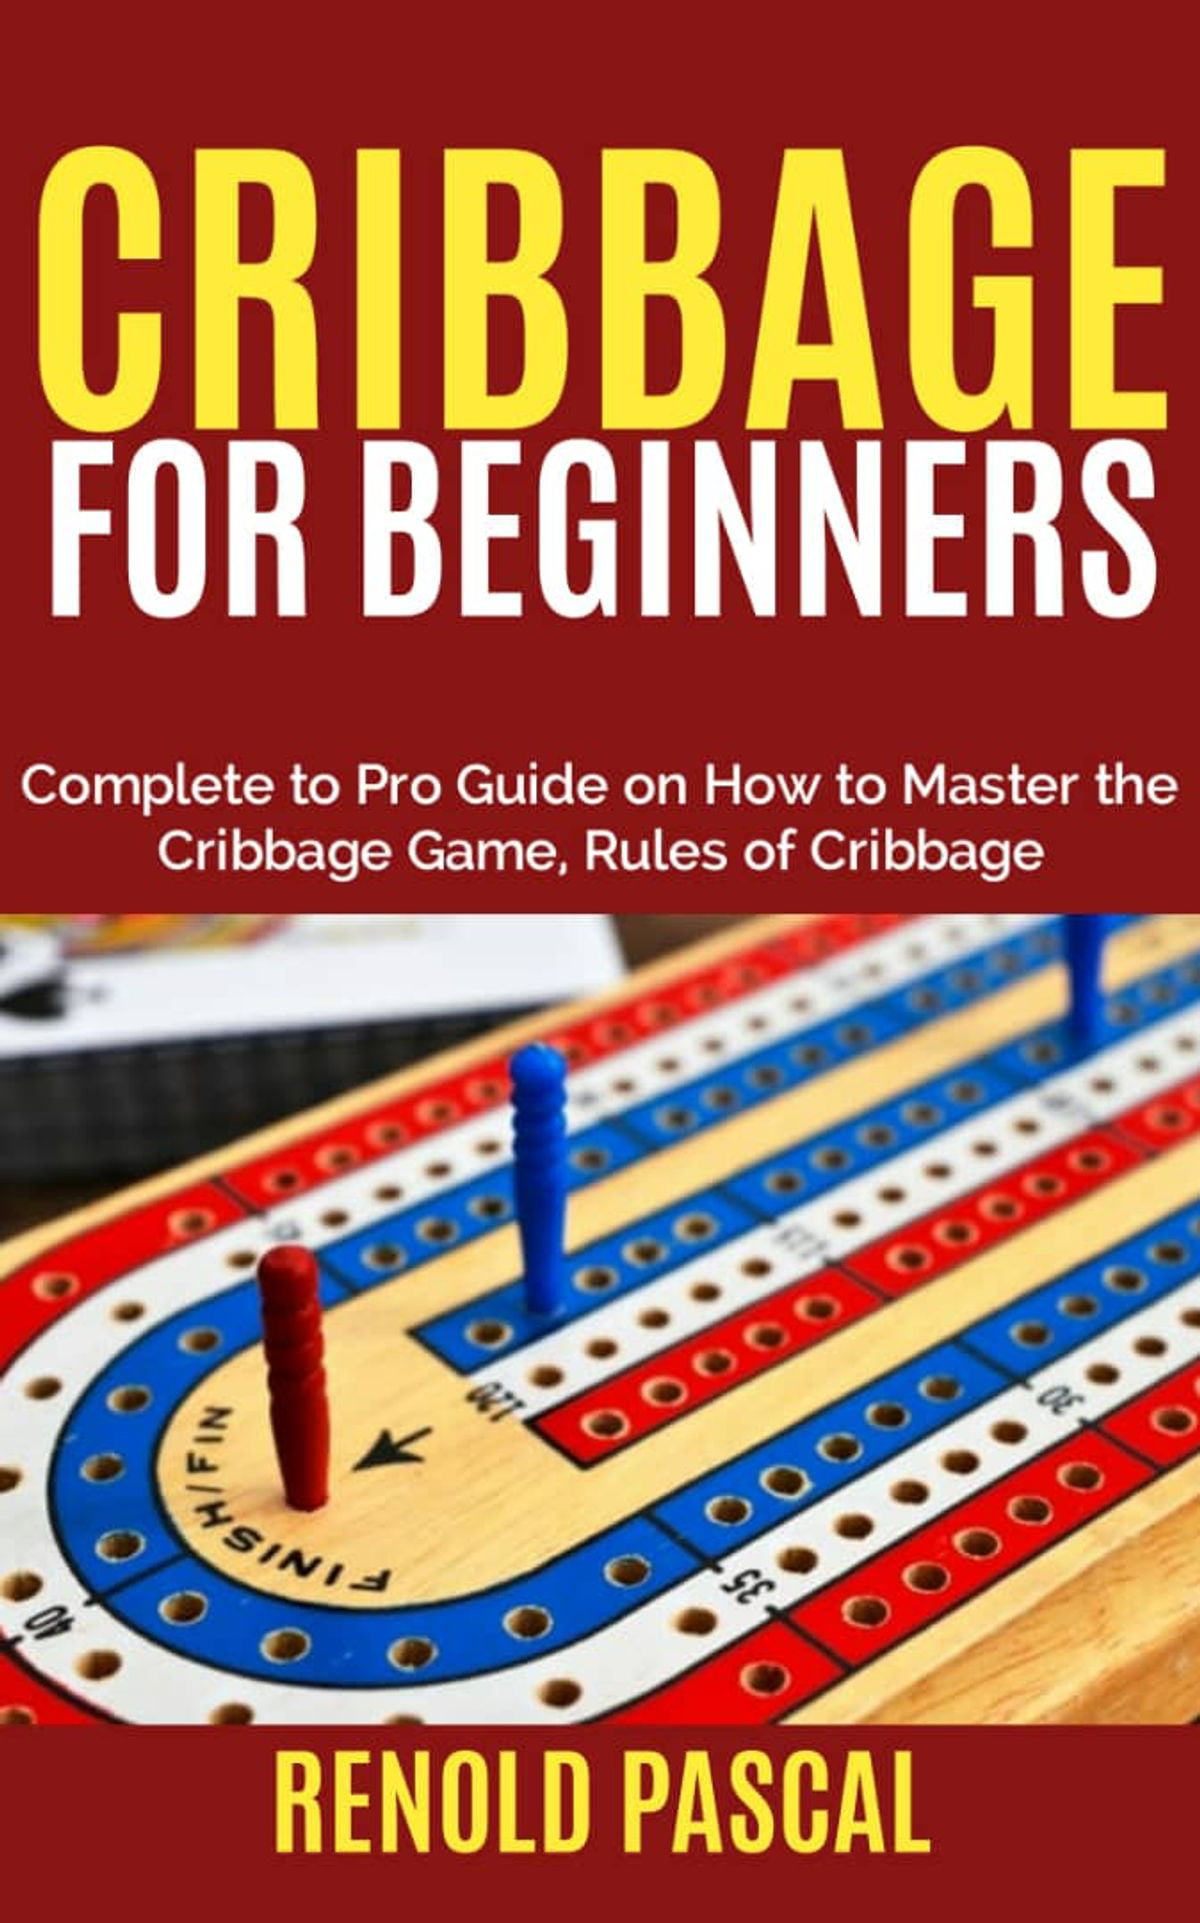 cribbage how to play